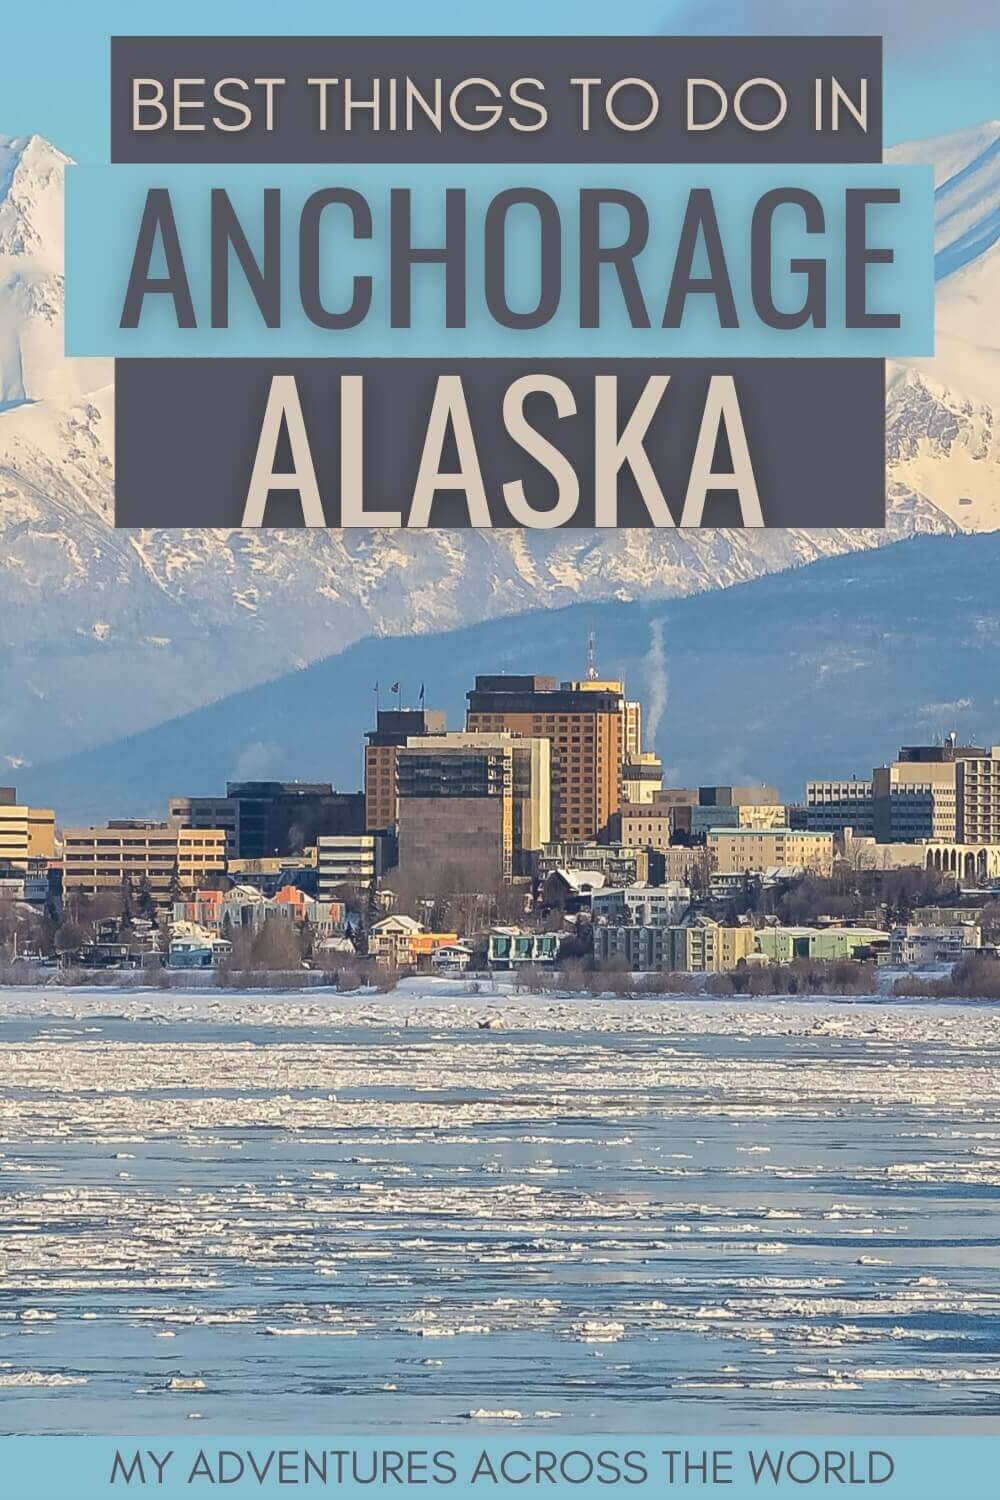 Read about the best things to do in Anchorage Alaska - via @clautavani